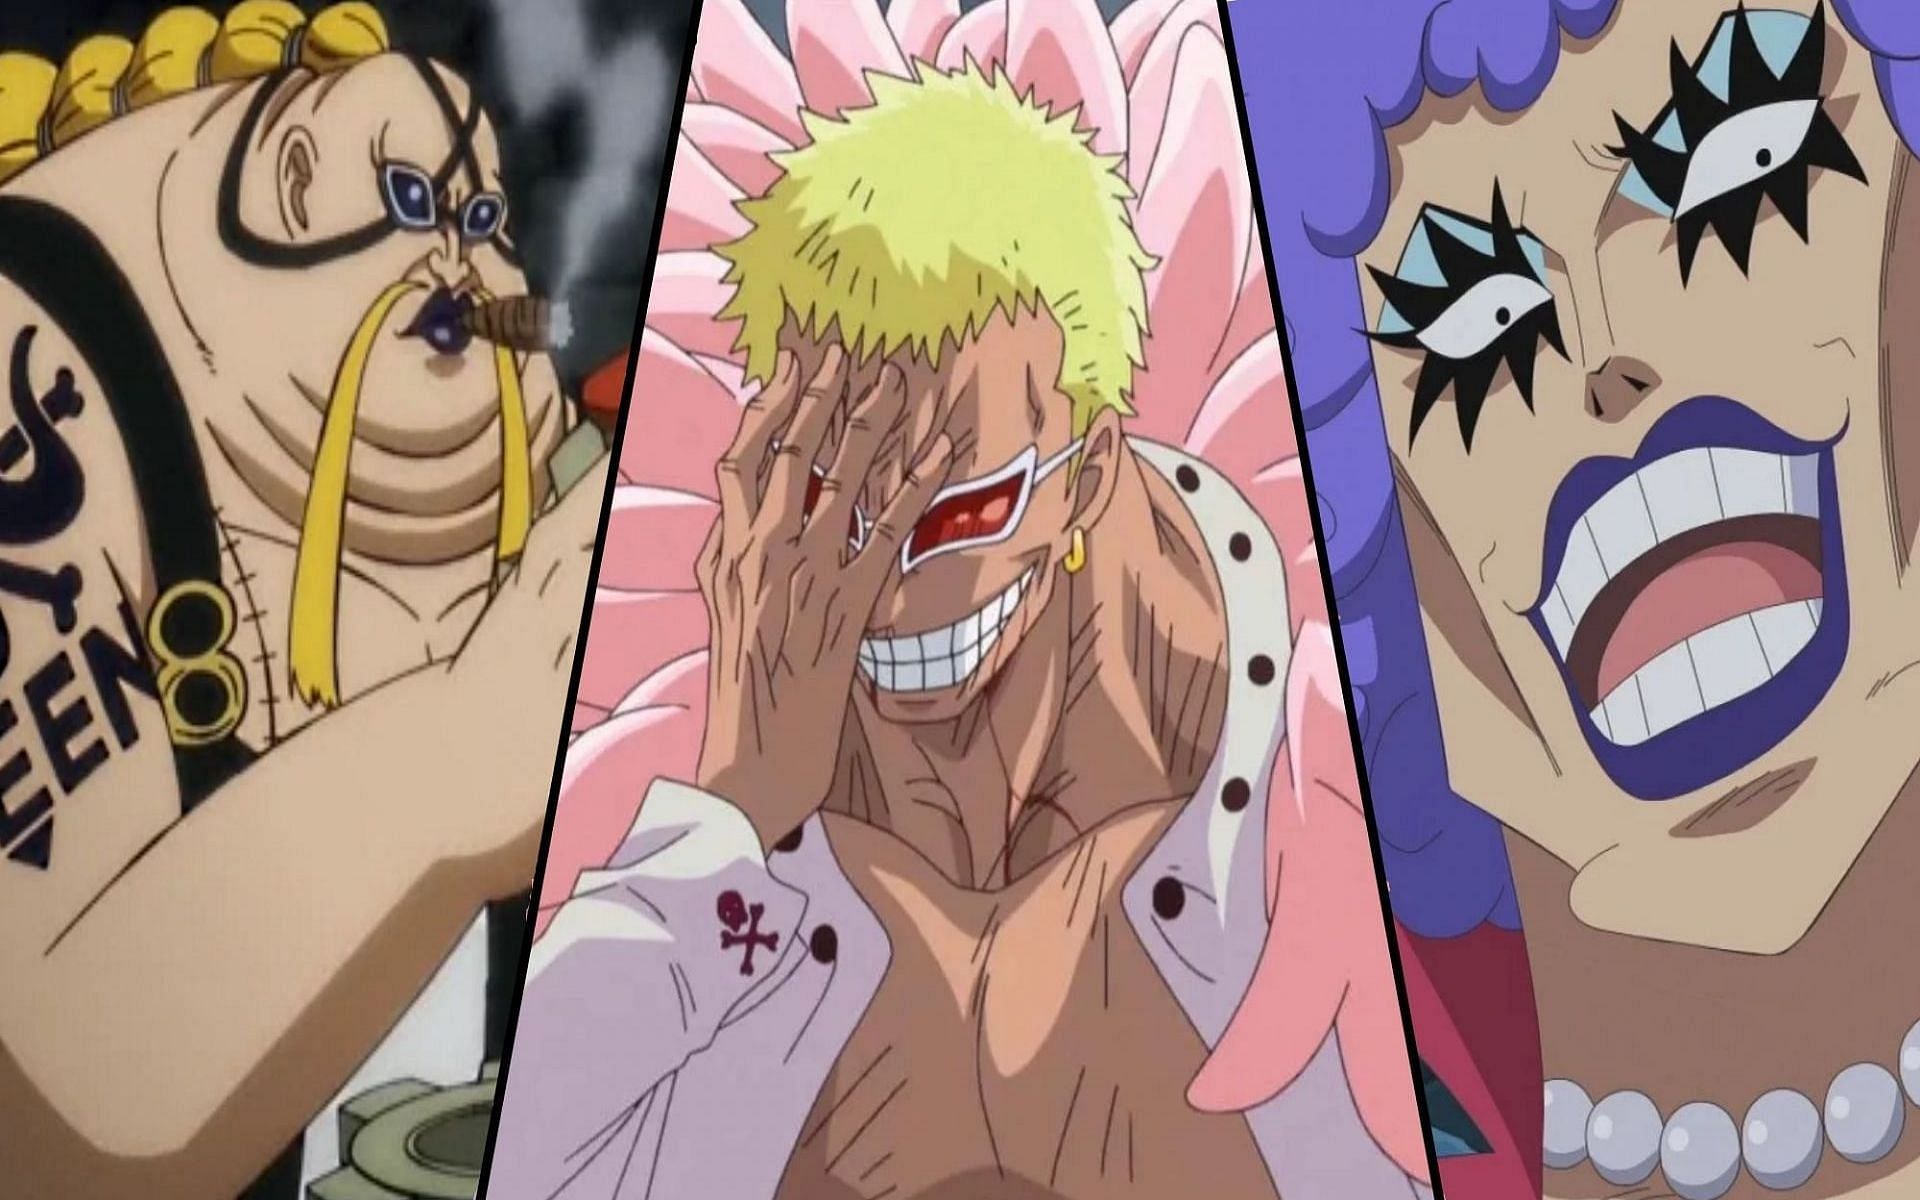 Top 10 Sanji Fights in One Piece